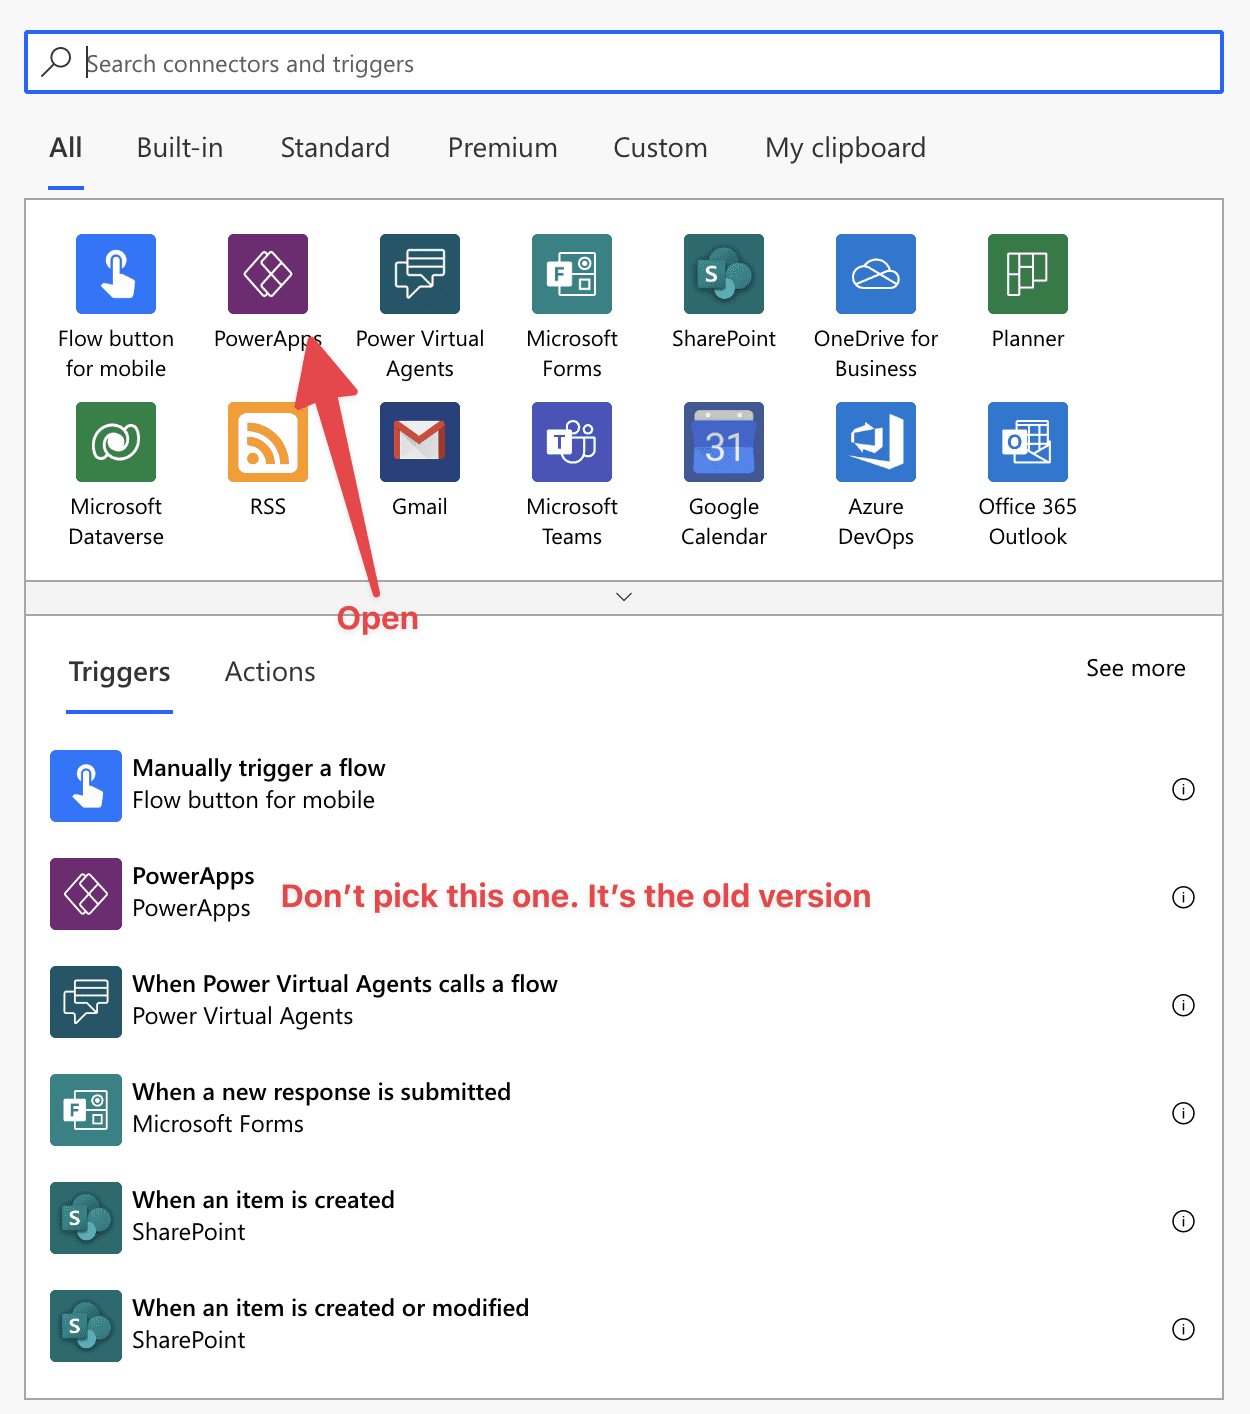 How to find the "PowerApps (V2)" trigger